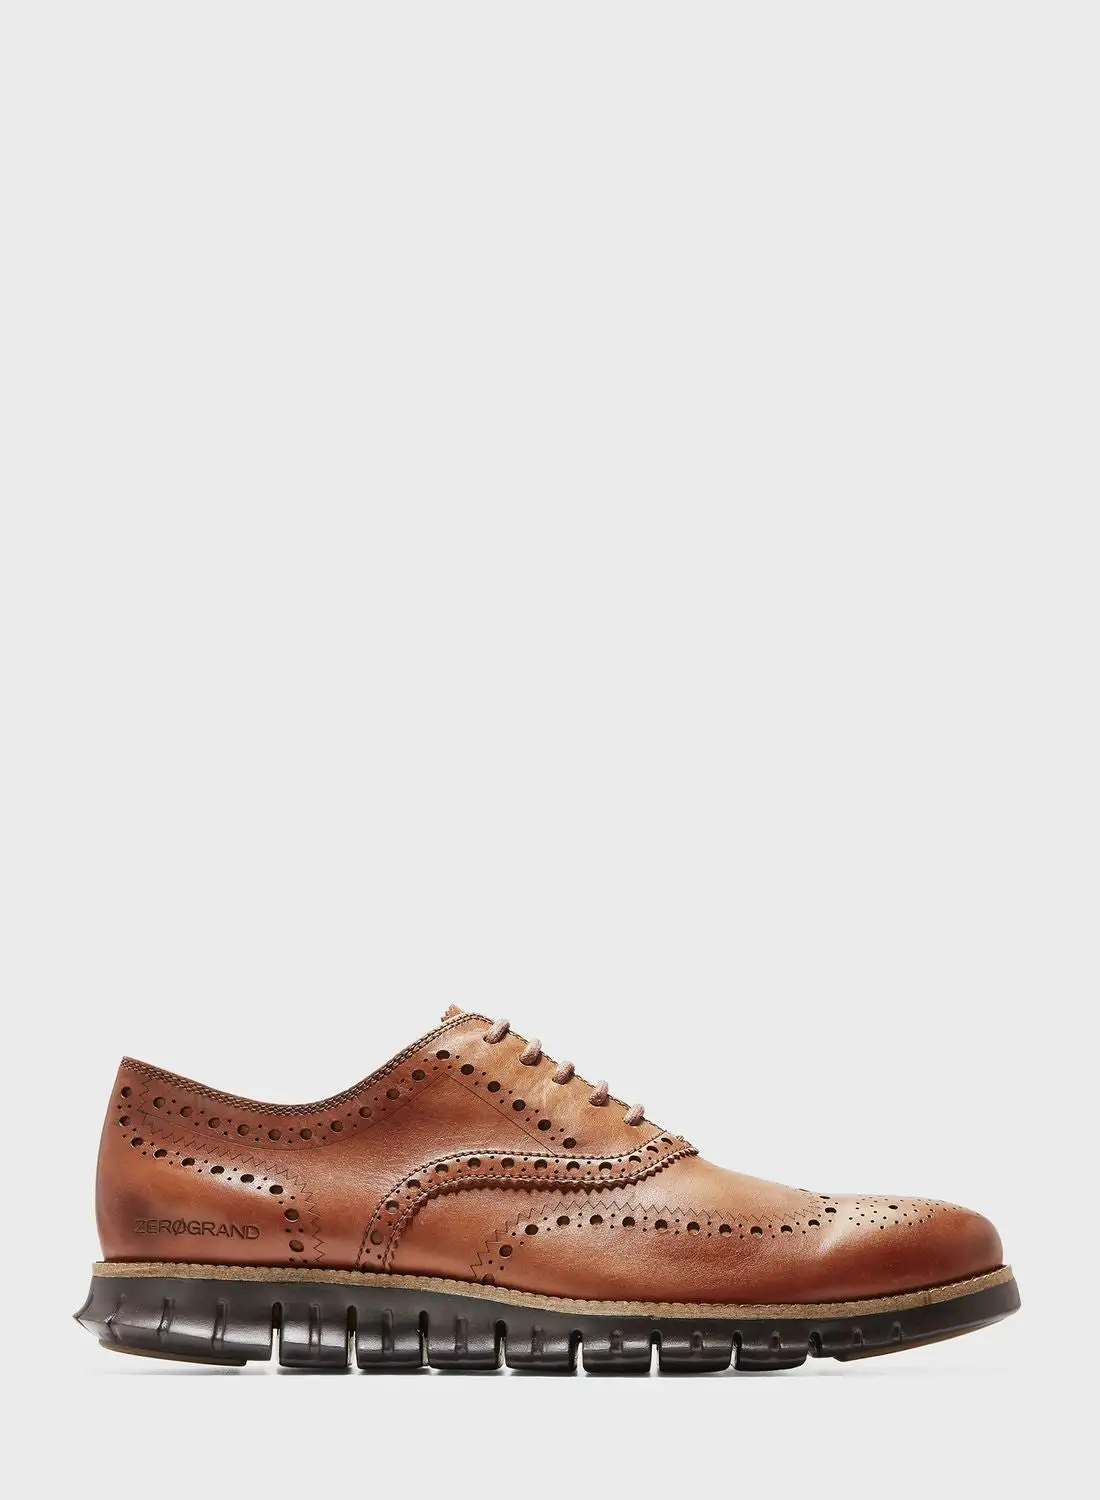 COLE HAAN Formal Lace Up